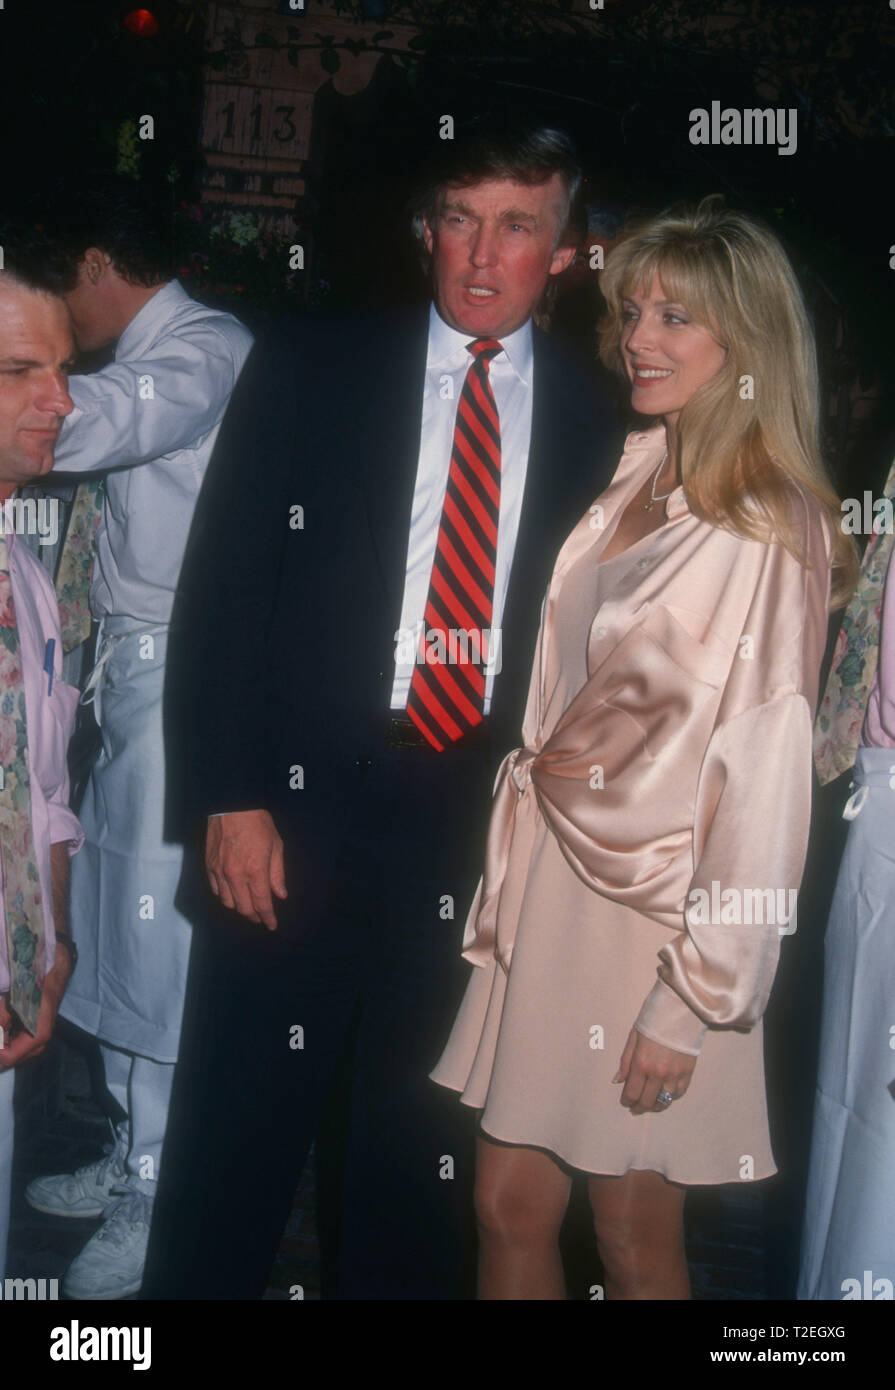 LOS ANGELES, CA - MARCH 12: Donald Trump and wife actress Marla Maples on March 12, 1994 at The Ivy Restaurant in Los Angeles, California. Photo by Barry King/Alamy Stock Photo Stock Photo